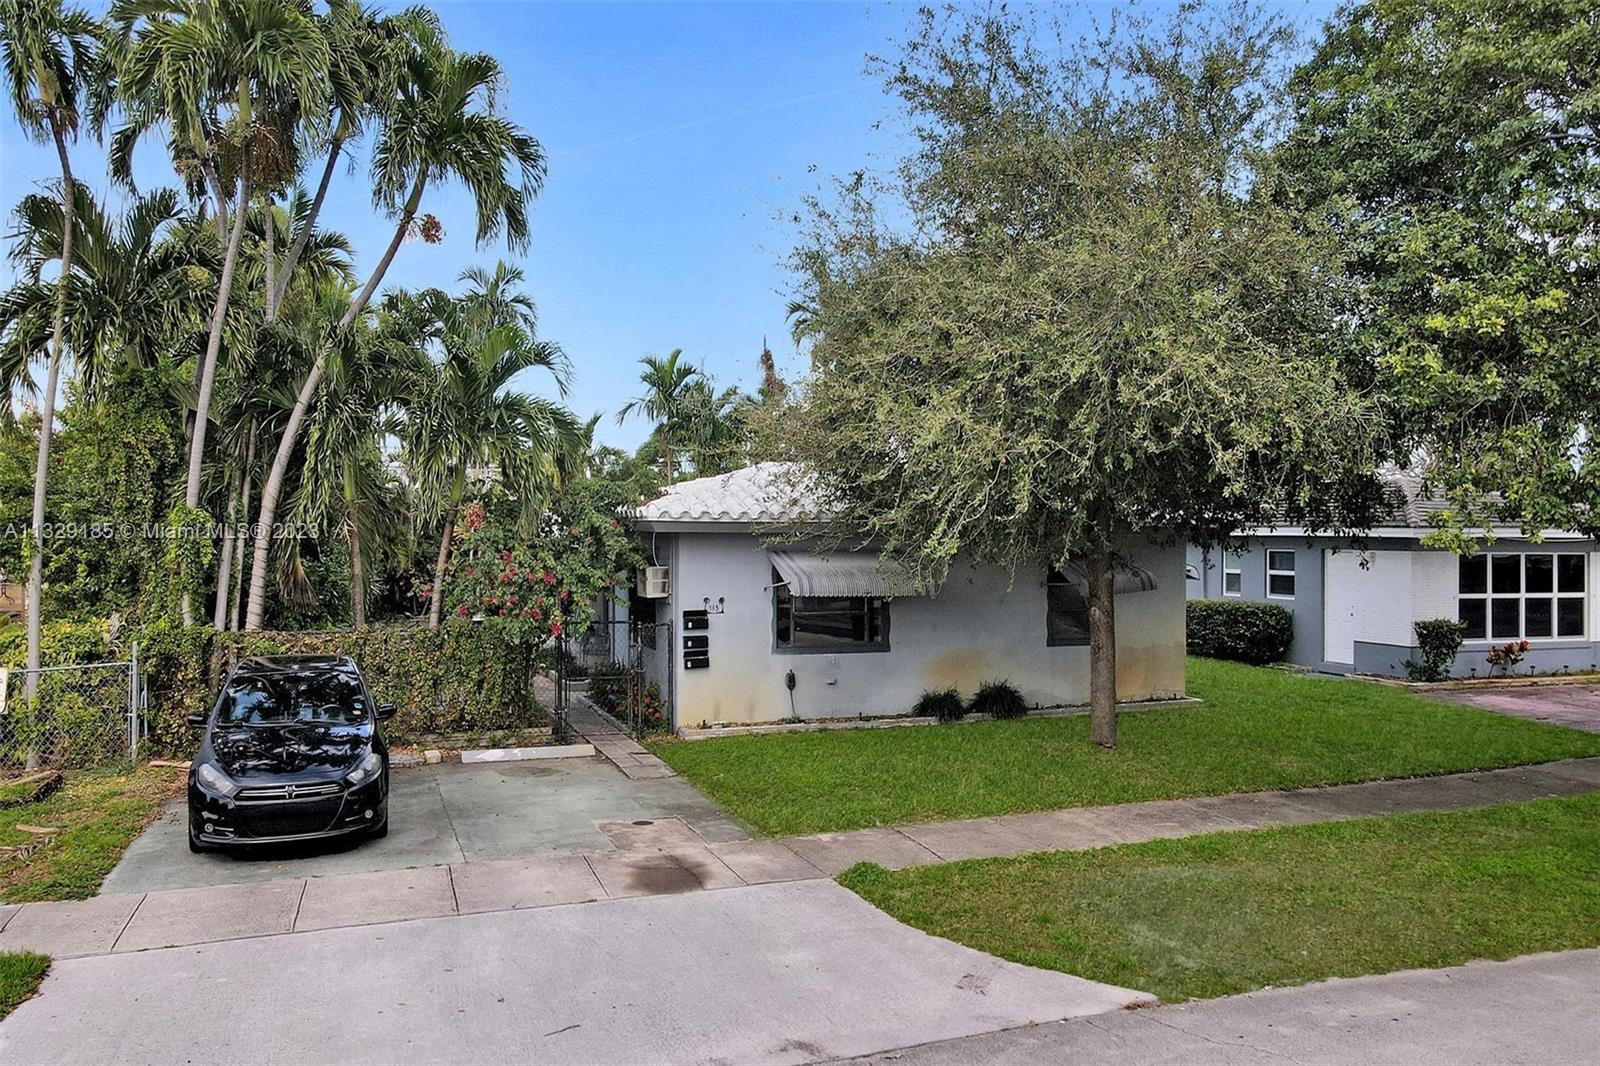 Hallandale Beach - Triplex - Will not last. Stop on by and check out this well income multi-family. 